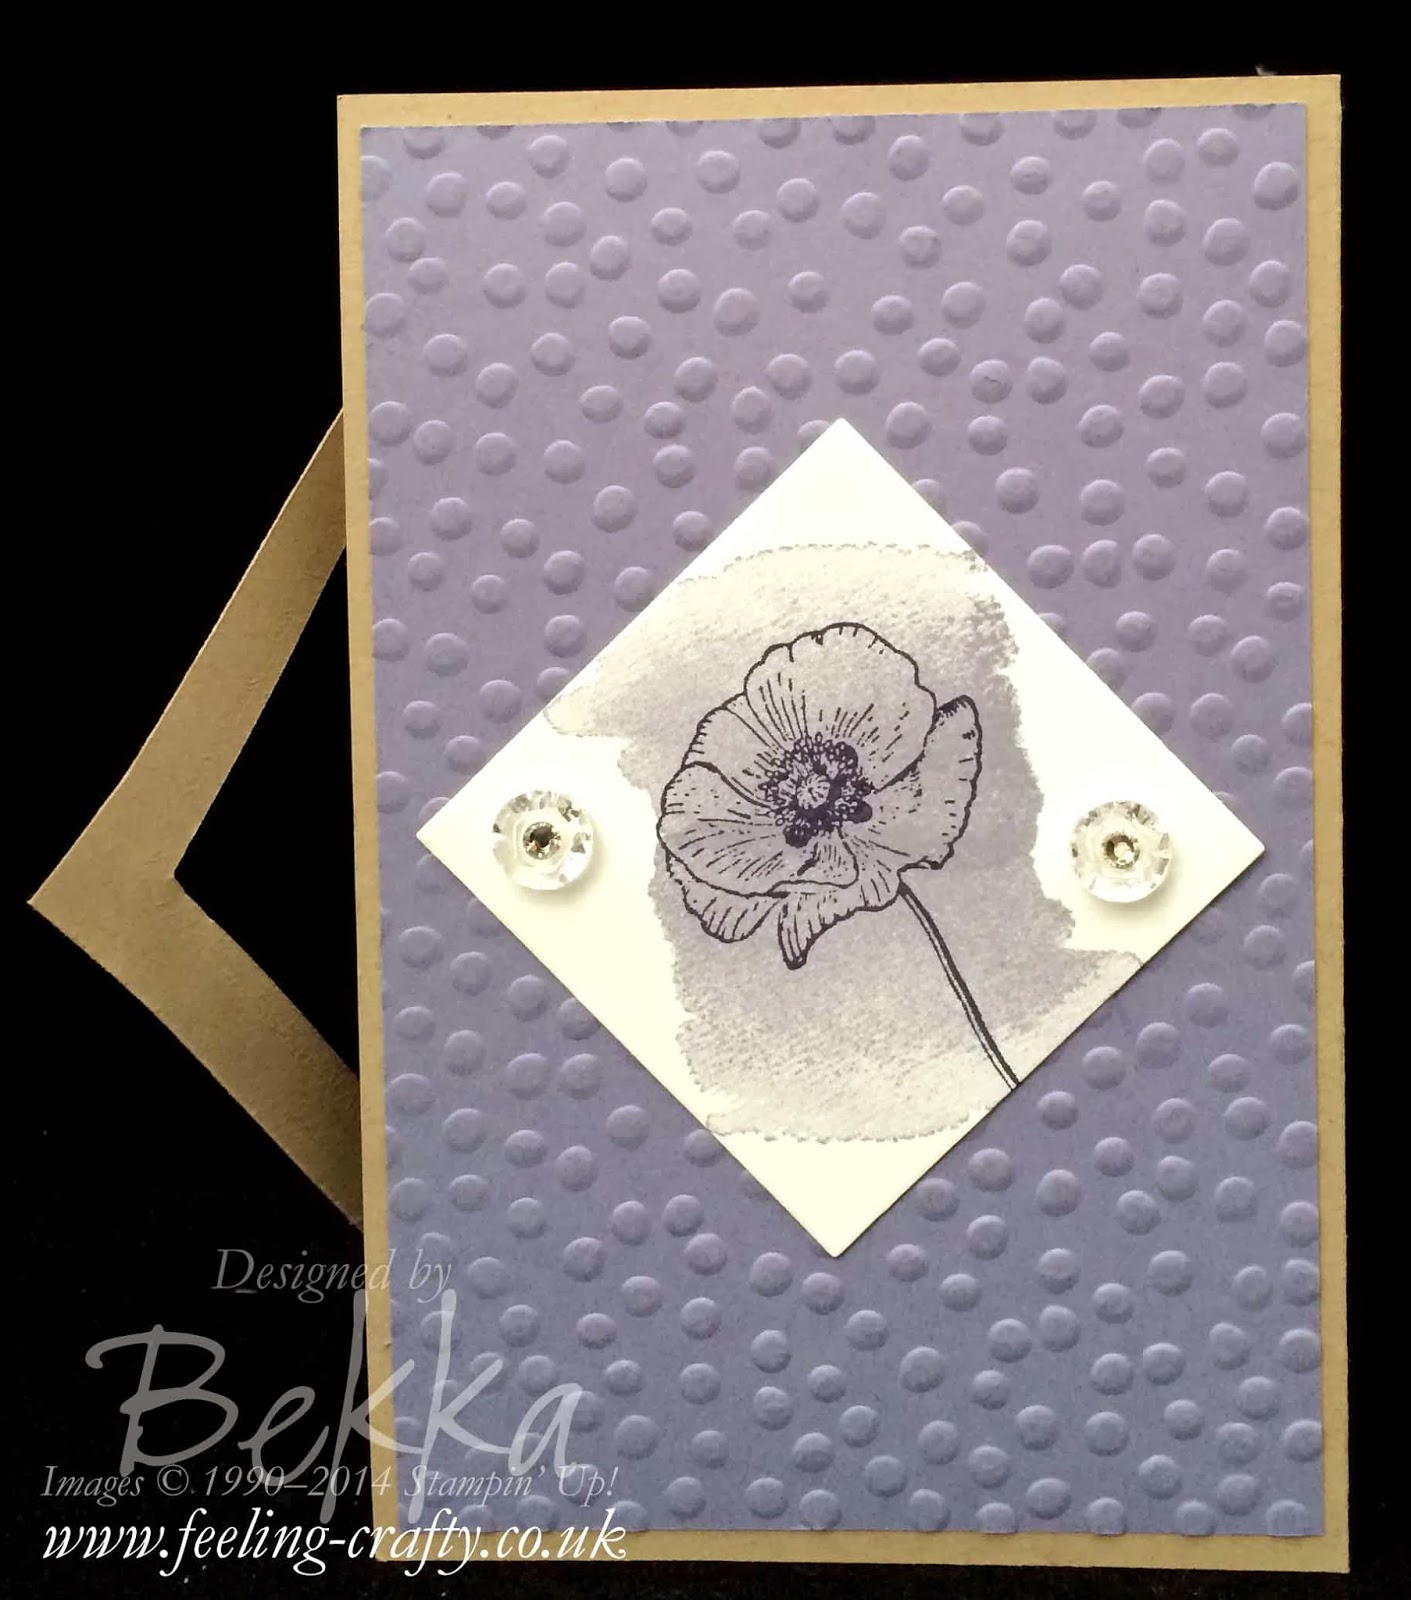 Happy Watercolor Fancy Fold Card by UK based Stampin' Up! demonstrator Bekka Prideaux - she has a card class featuring this stamp set!  If you can't go in person her class is available by post - must check it out